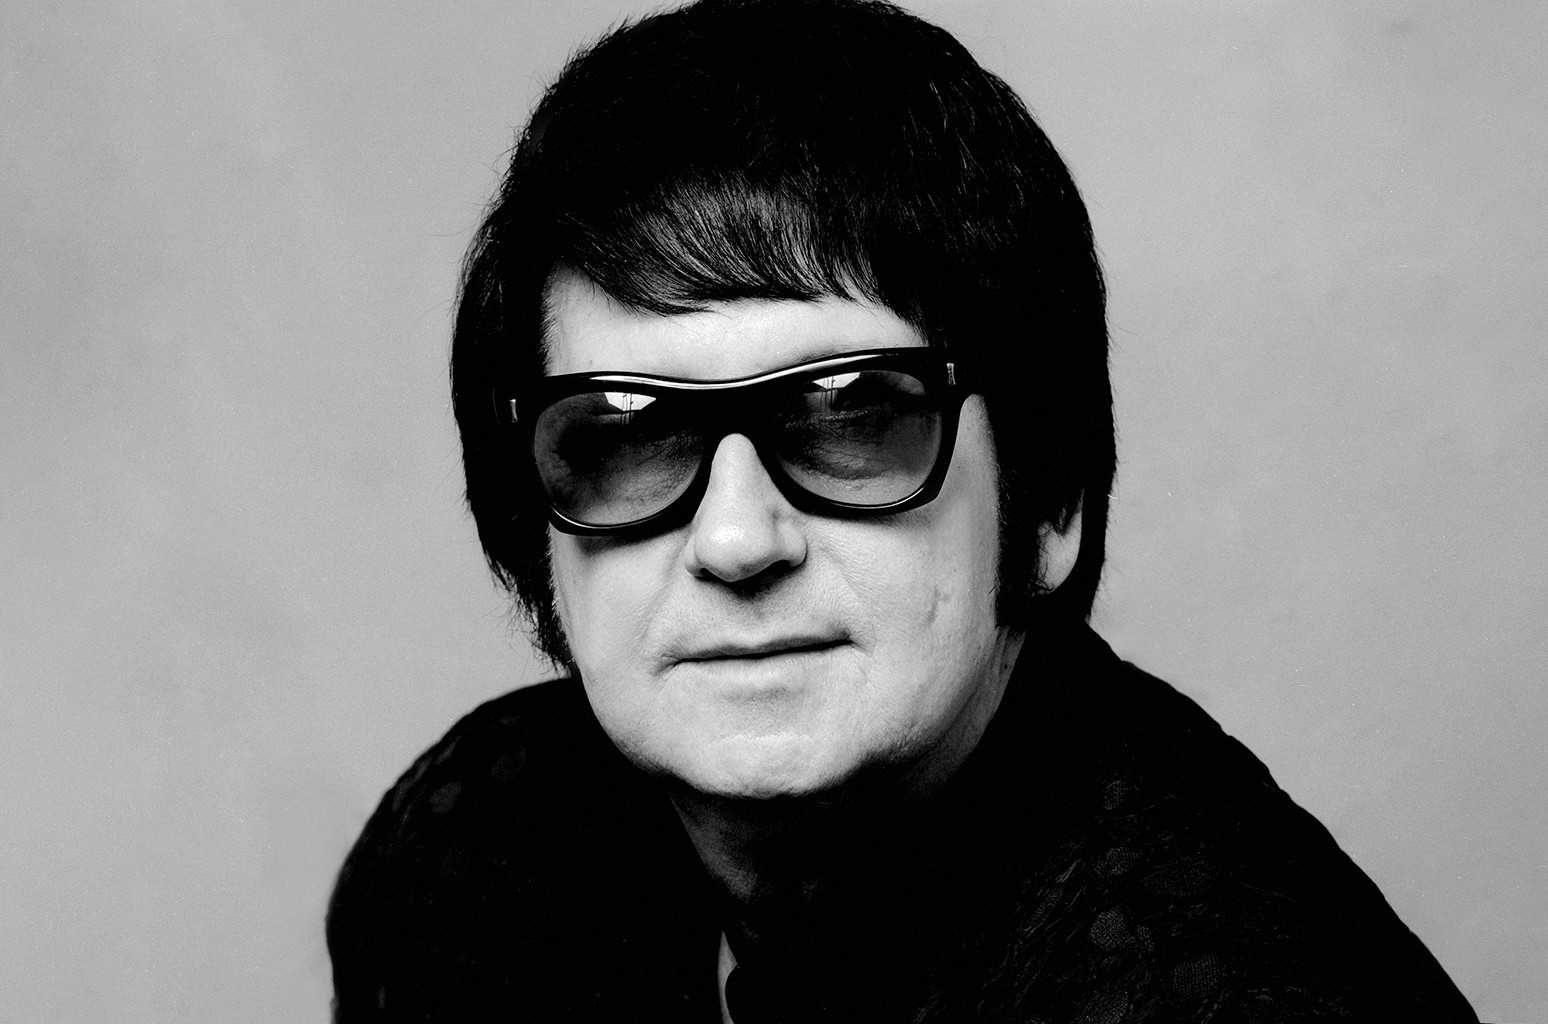 Image of American musician, Roy Orbison